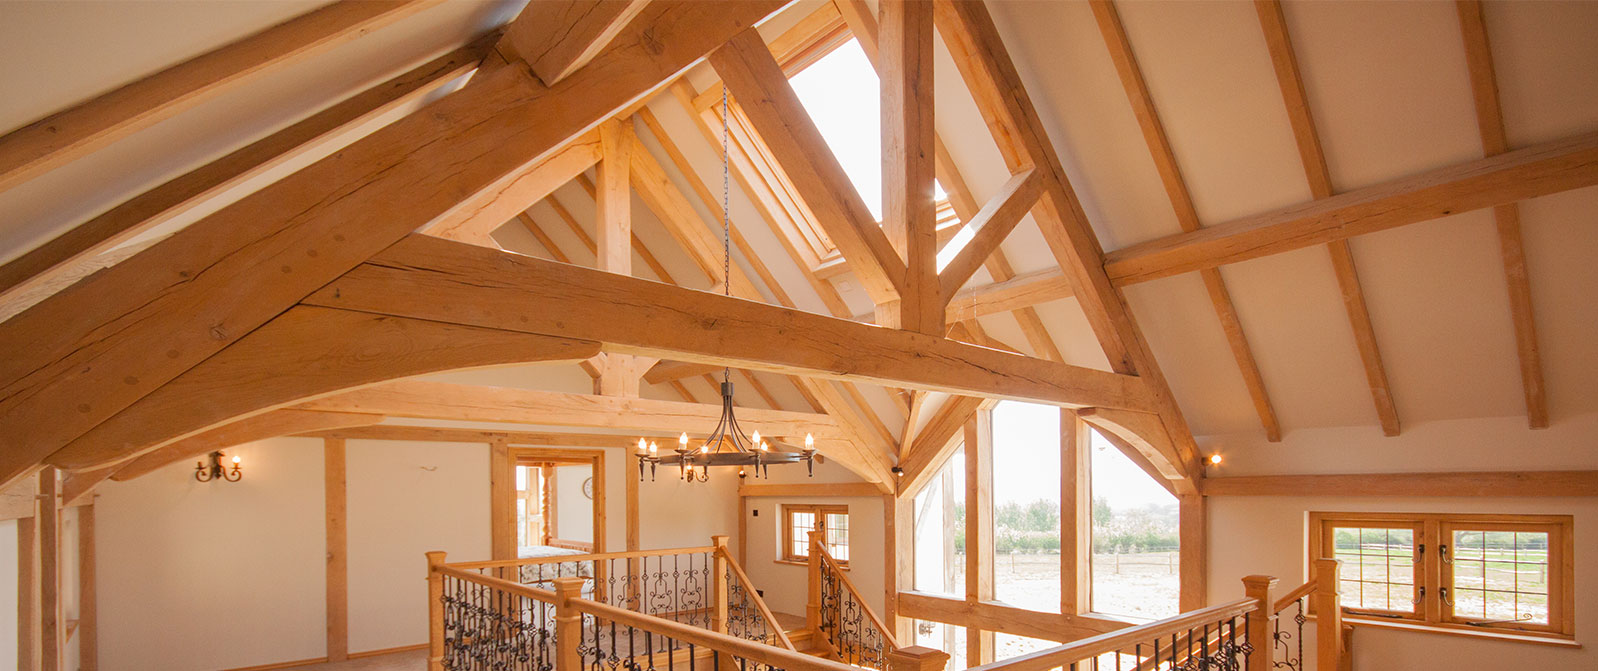 The Benefits of Choosing King Post Trusses in Your Building Design